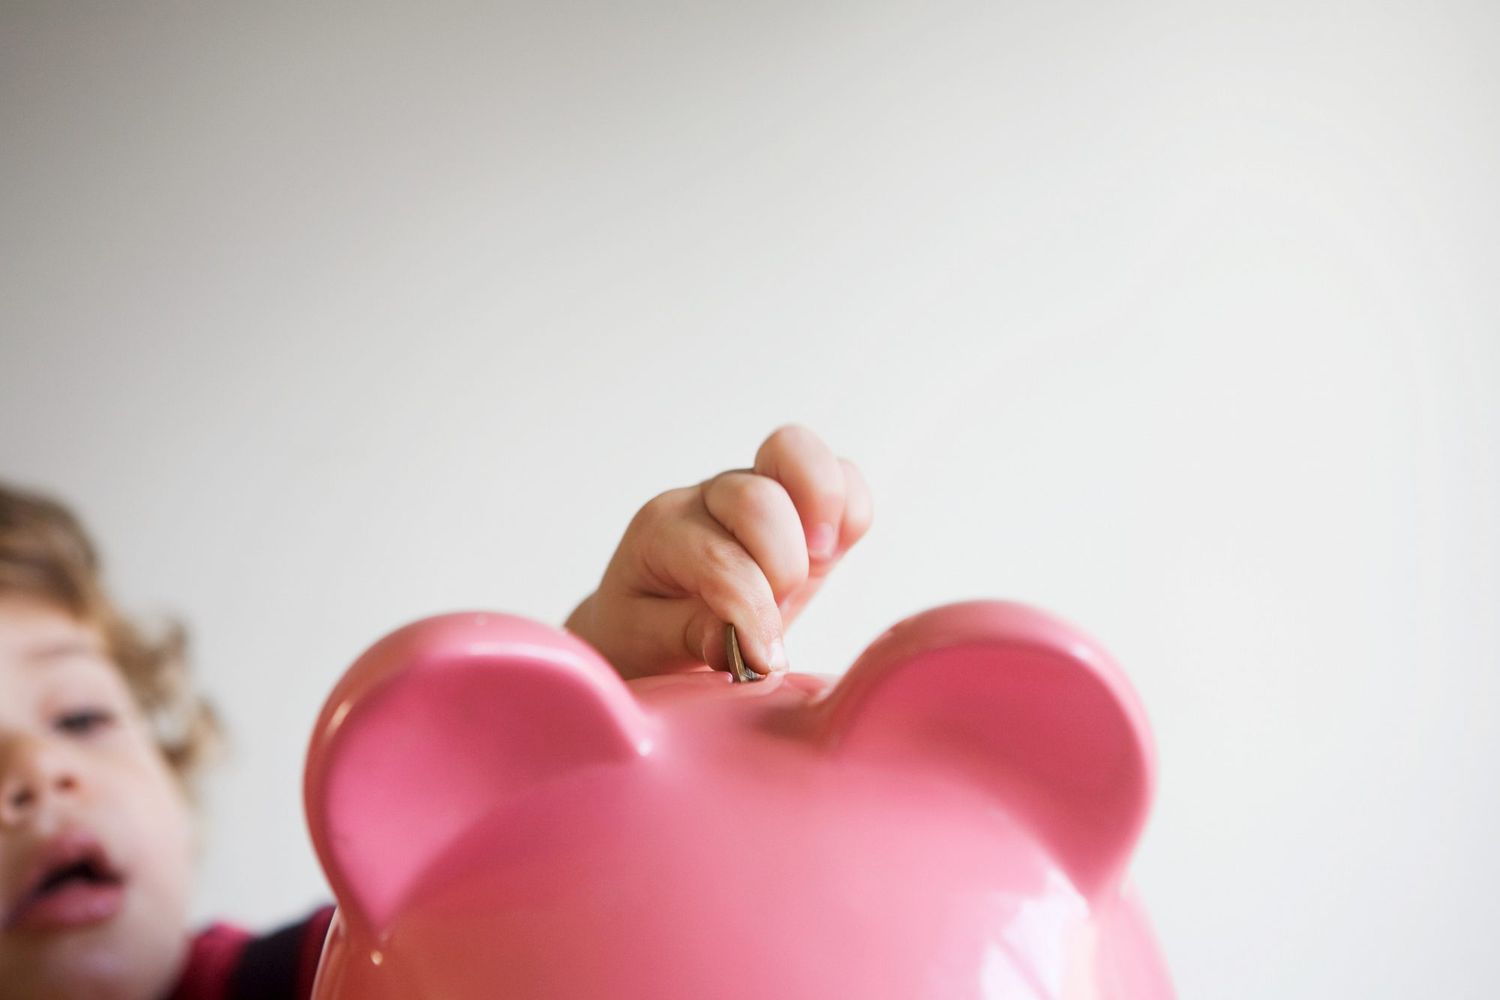 An image of a child with a piggy bank.